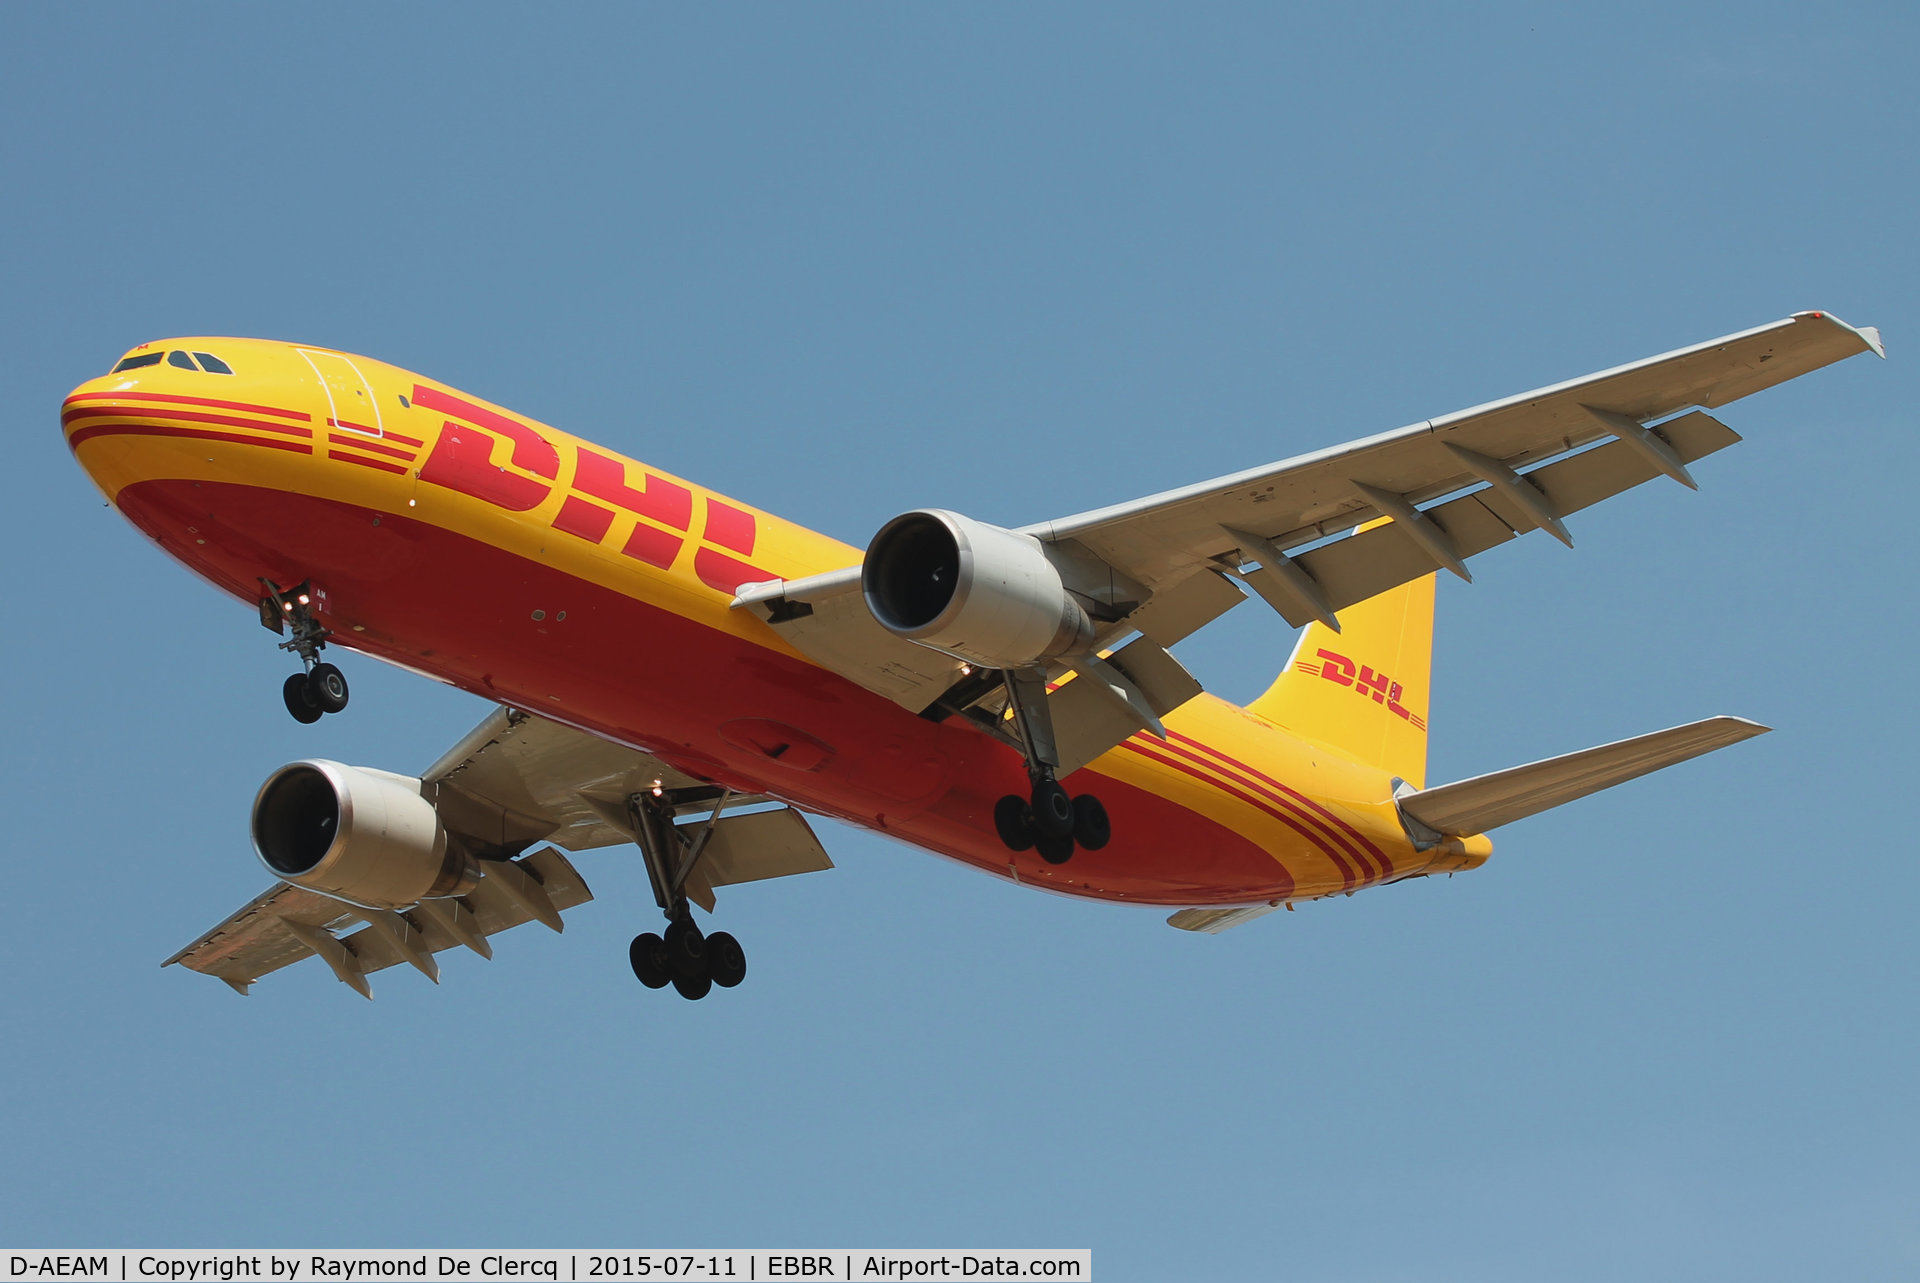 D-AEAM, 1999 Airbus A300B4-622R(F) C/N 797, D-AEAM  of DHL landing at Brussels Airport.